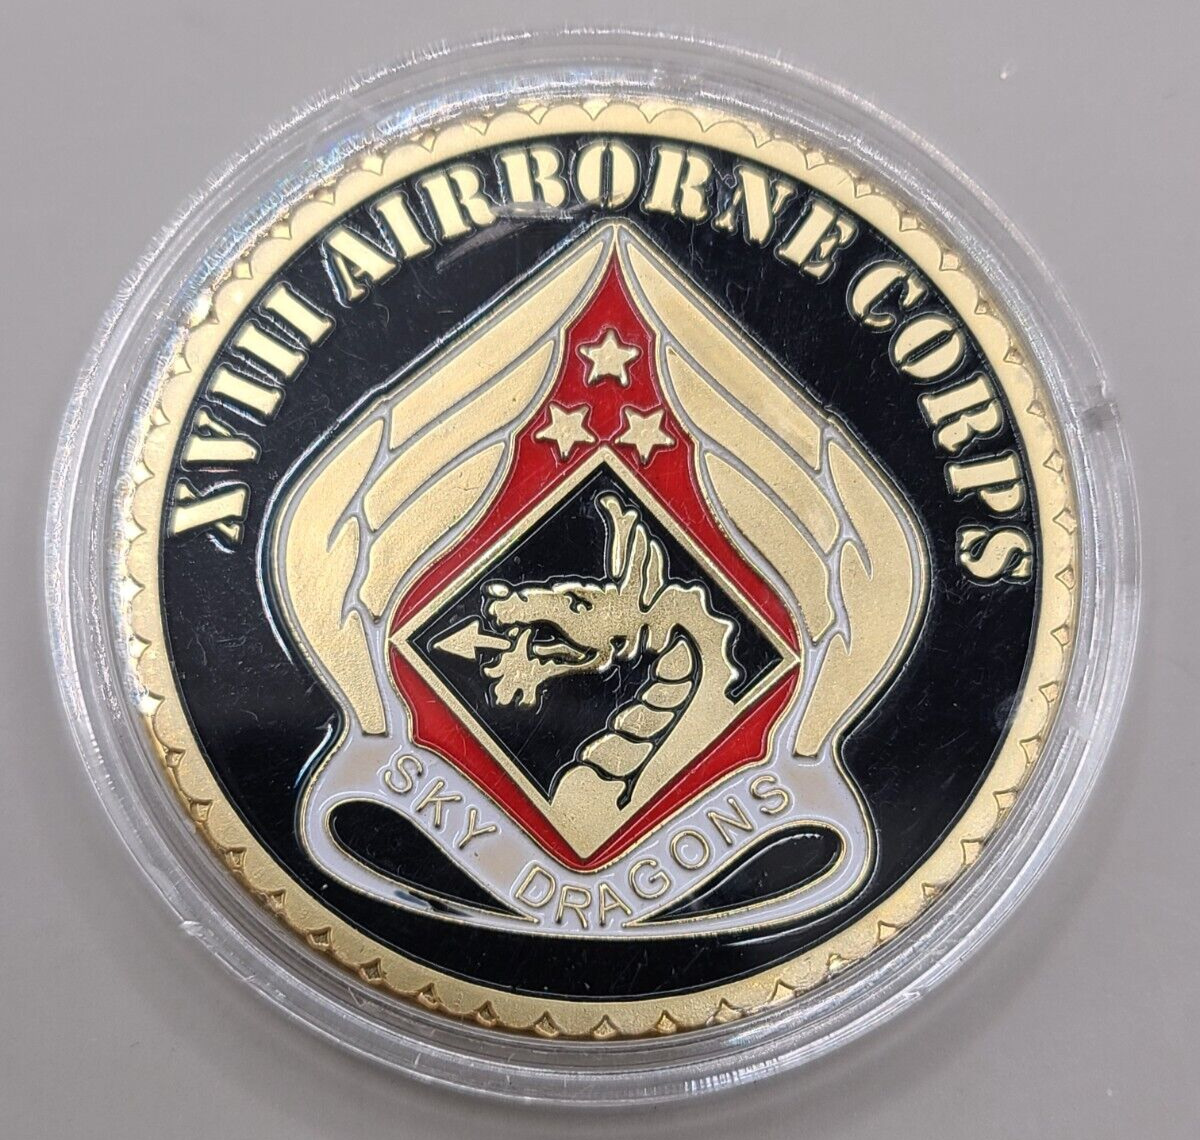 CHALLENGE COIN XVIII 18TH AIRBORNE CORPS SKY DRAGONS DEPARTMENT OF THE ARMY